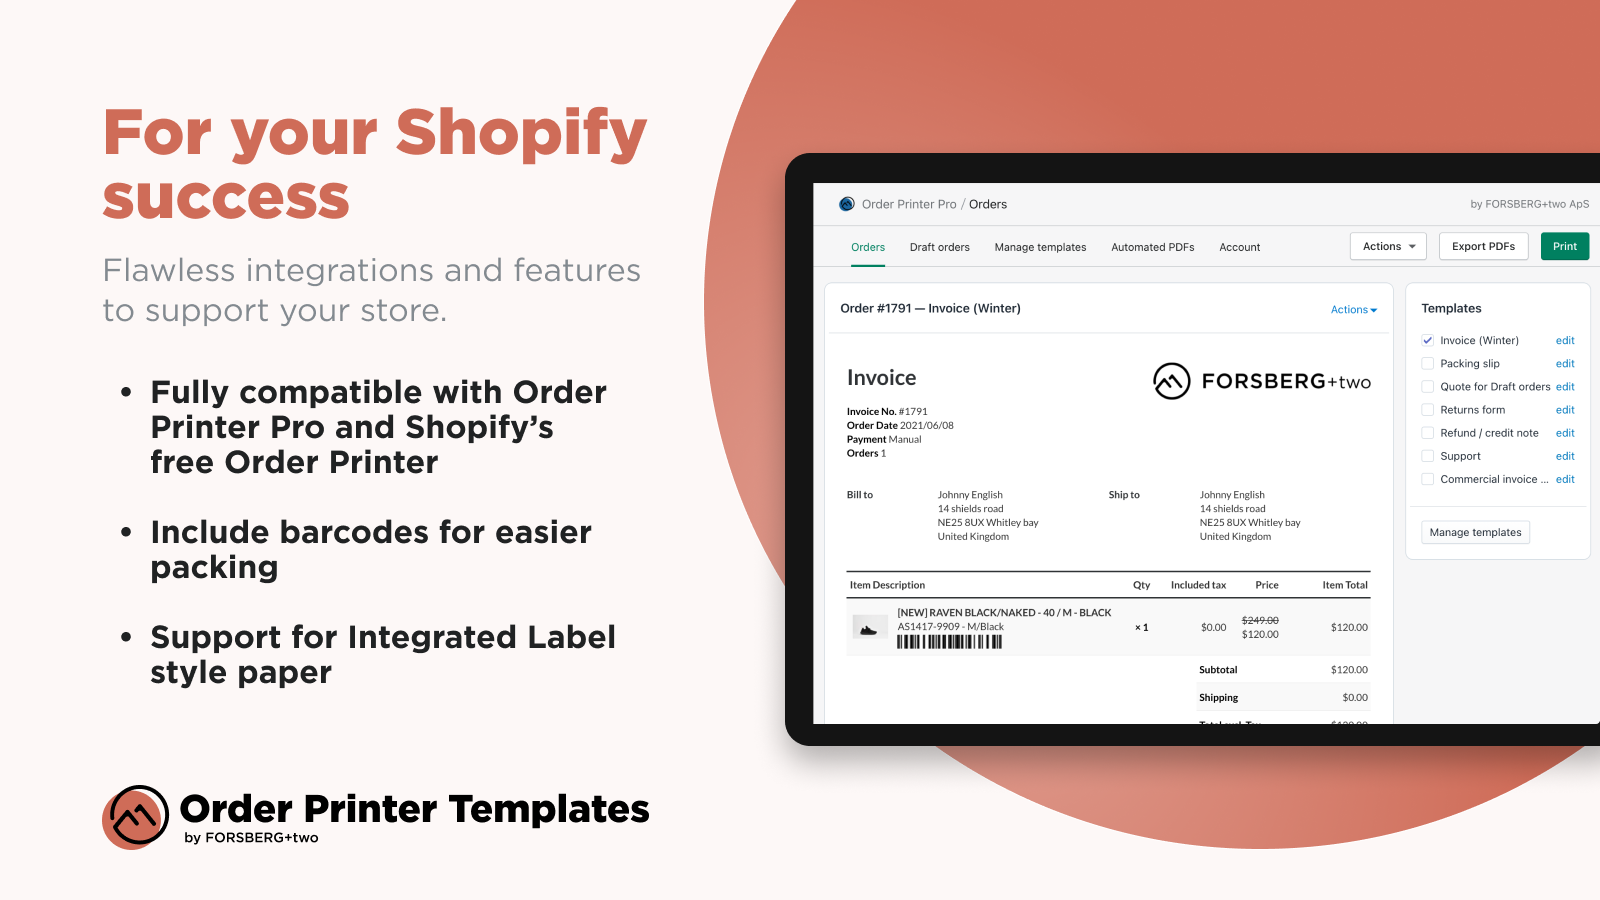 Flawless integrations and features to support your store.